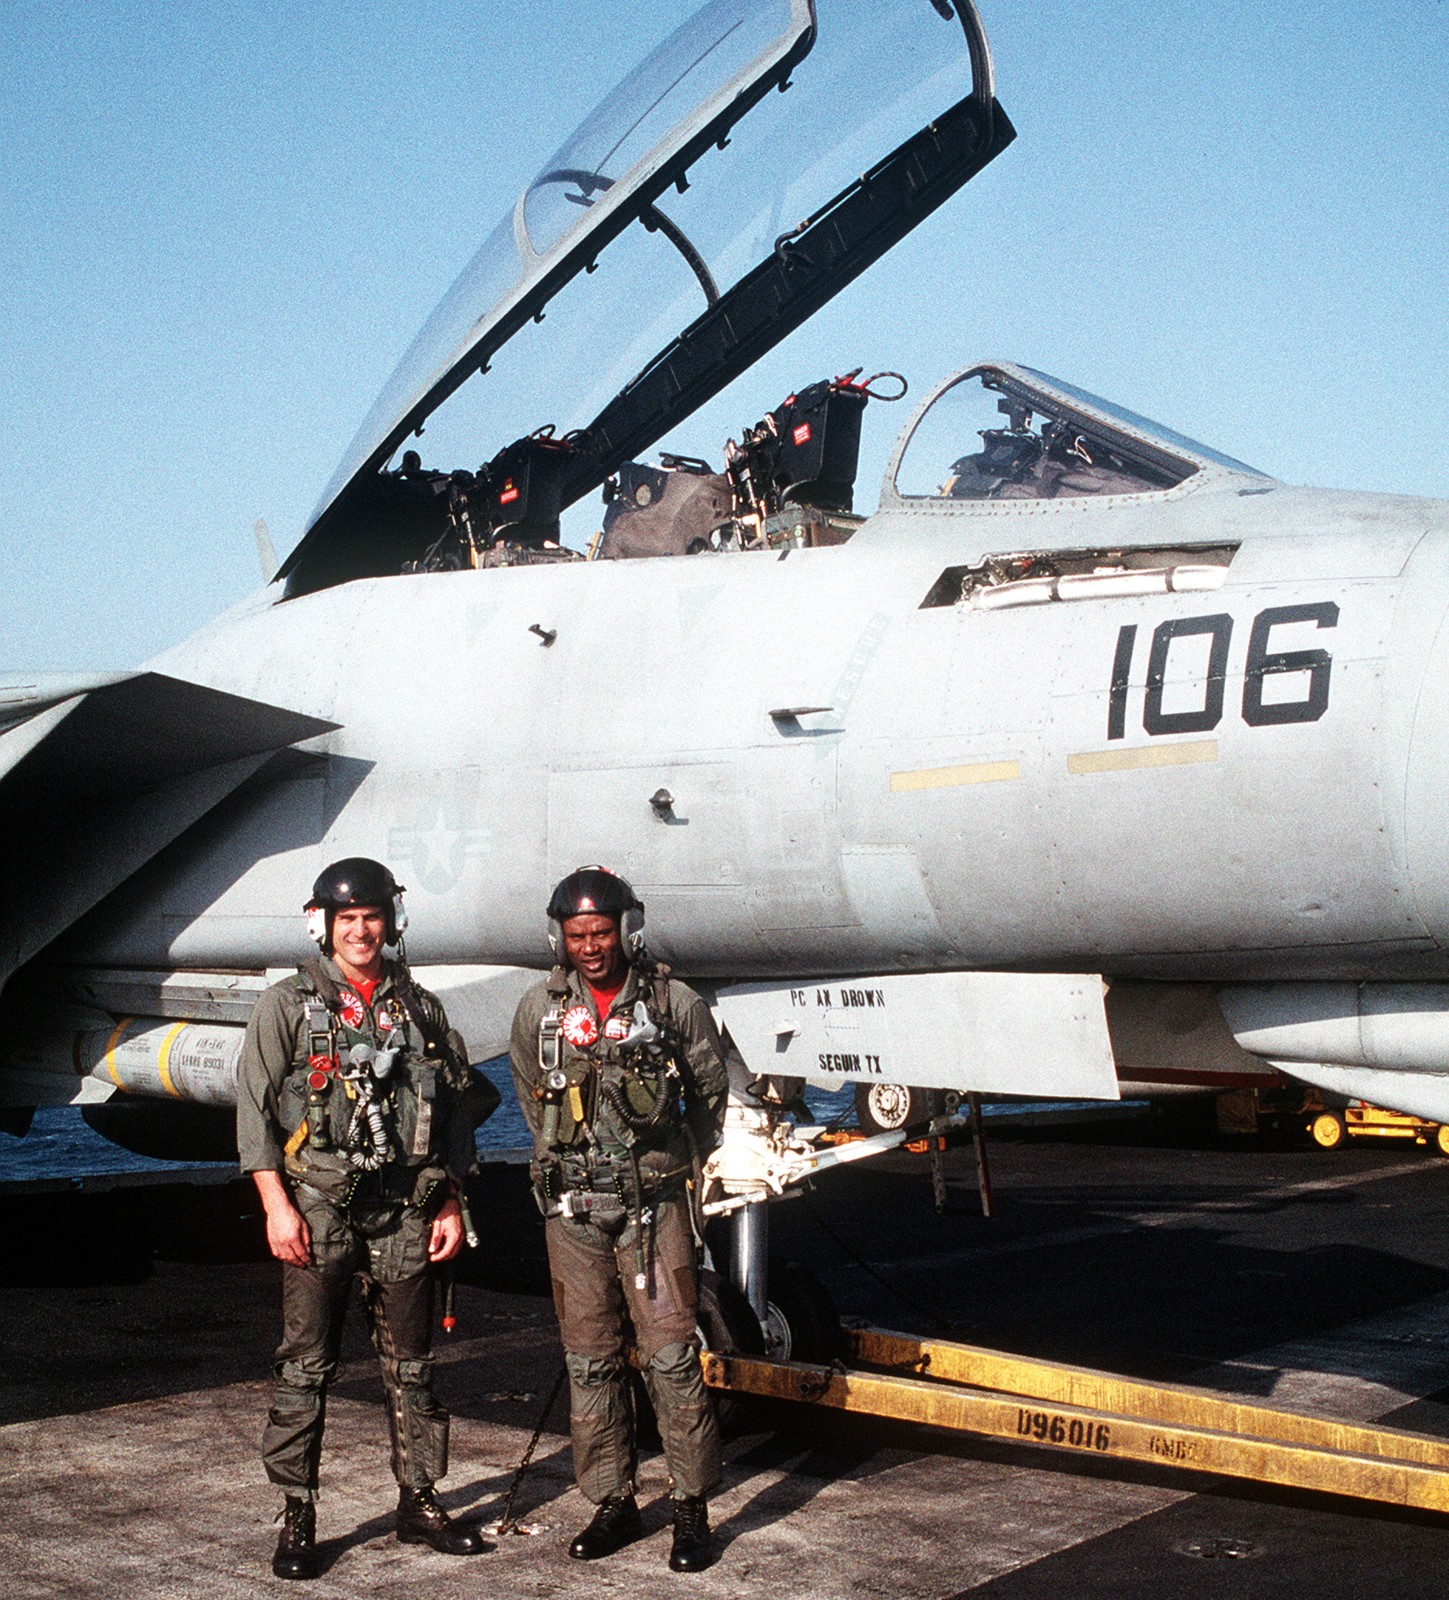 vf-1 wolfpack fighter squadron f-14a tomcat carrier air wing cvw-2 uss ranger cv-61 63